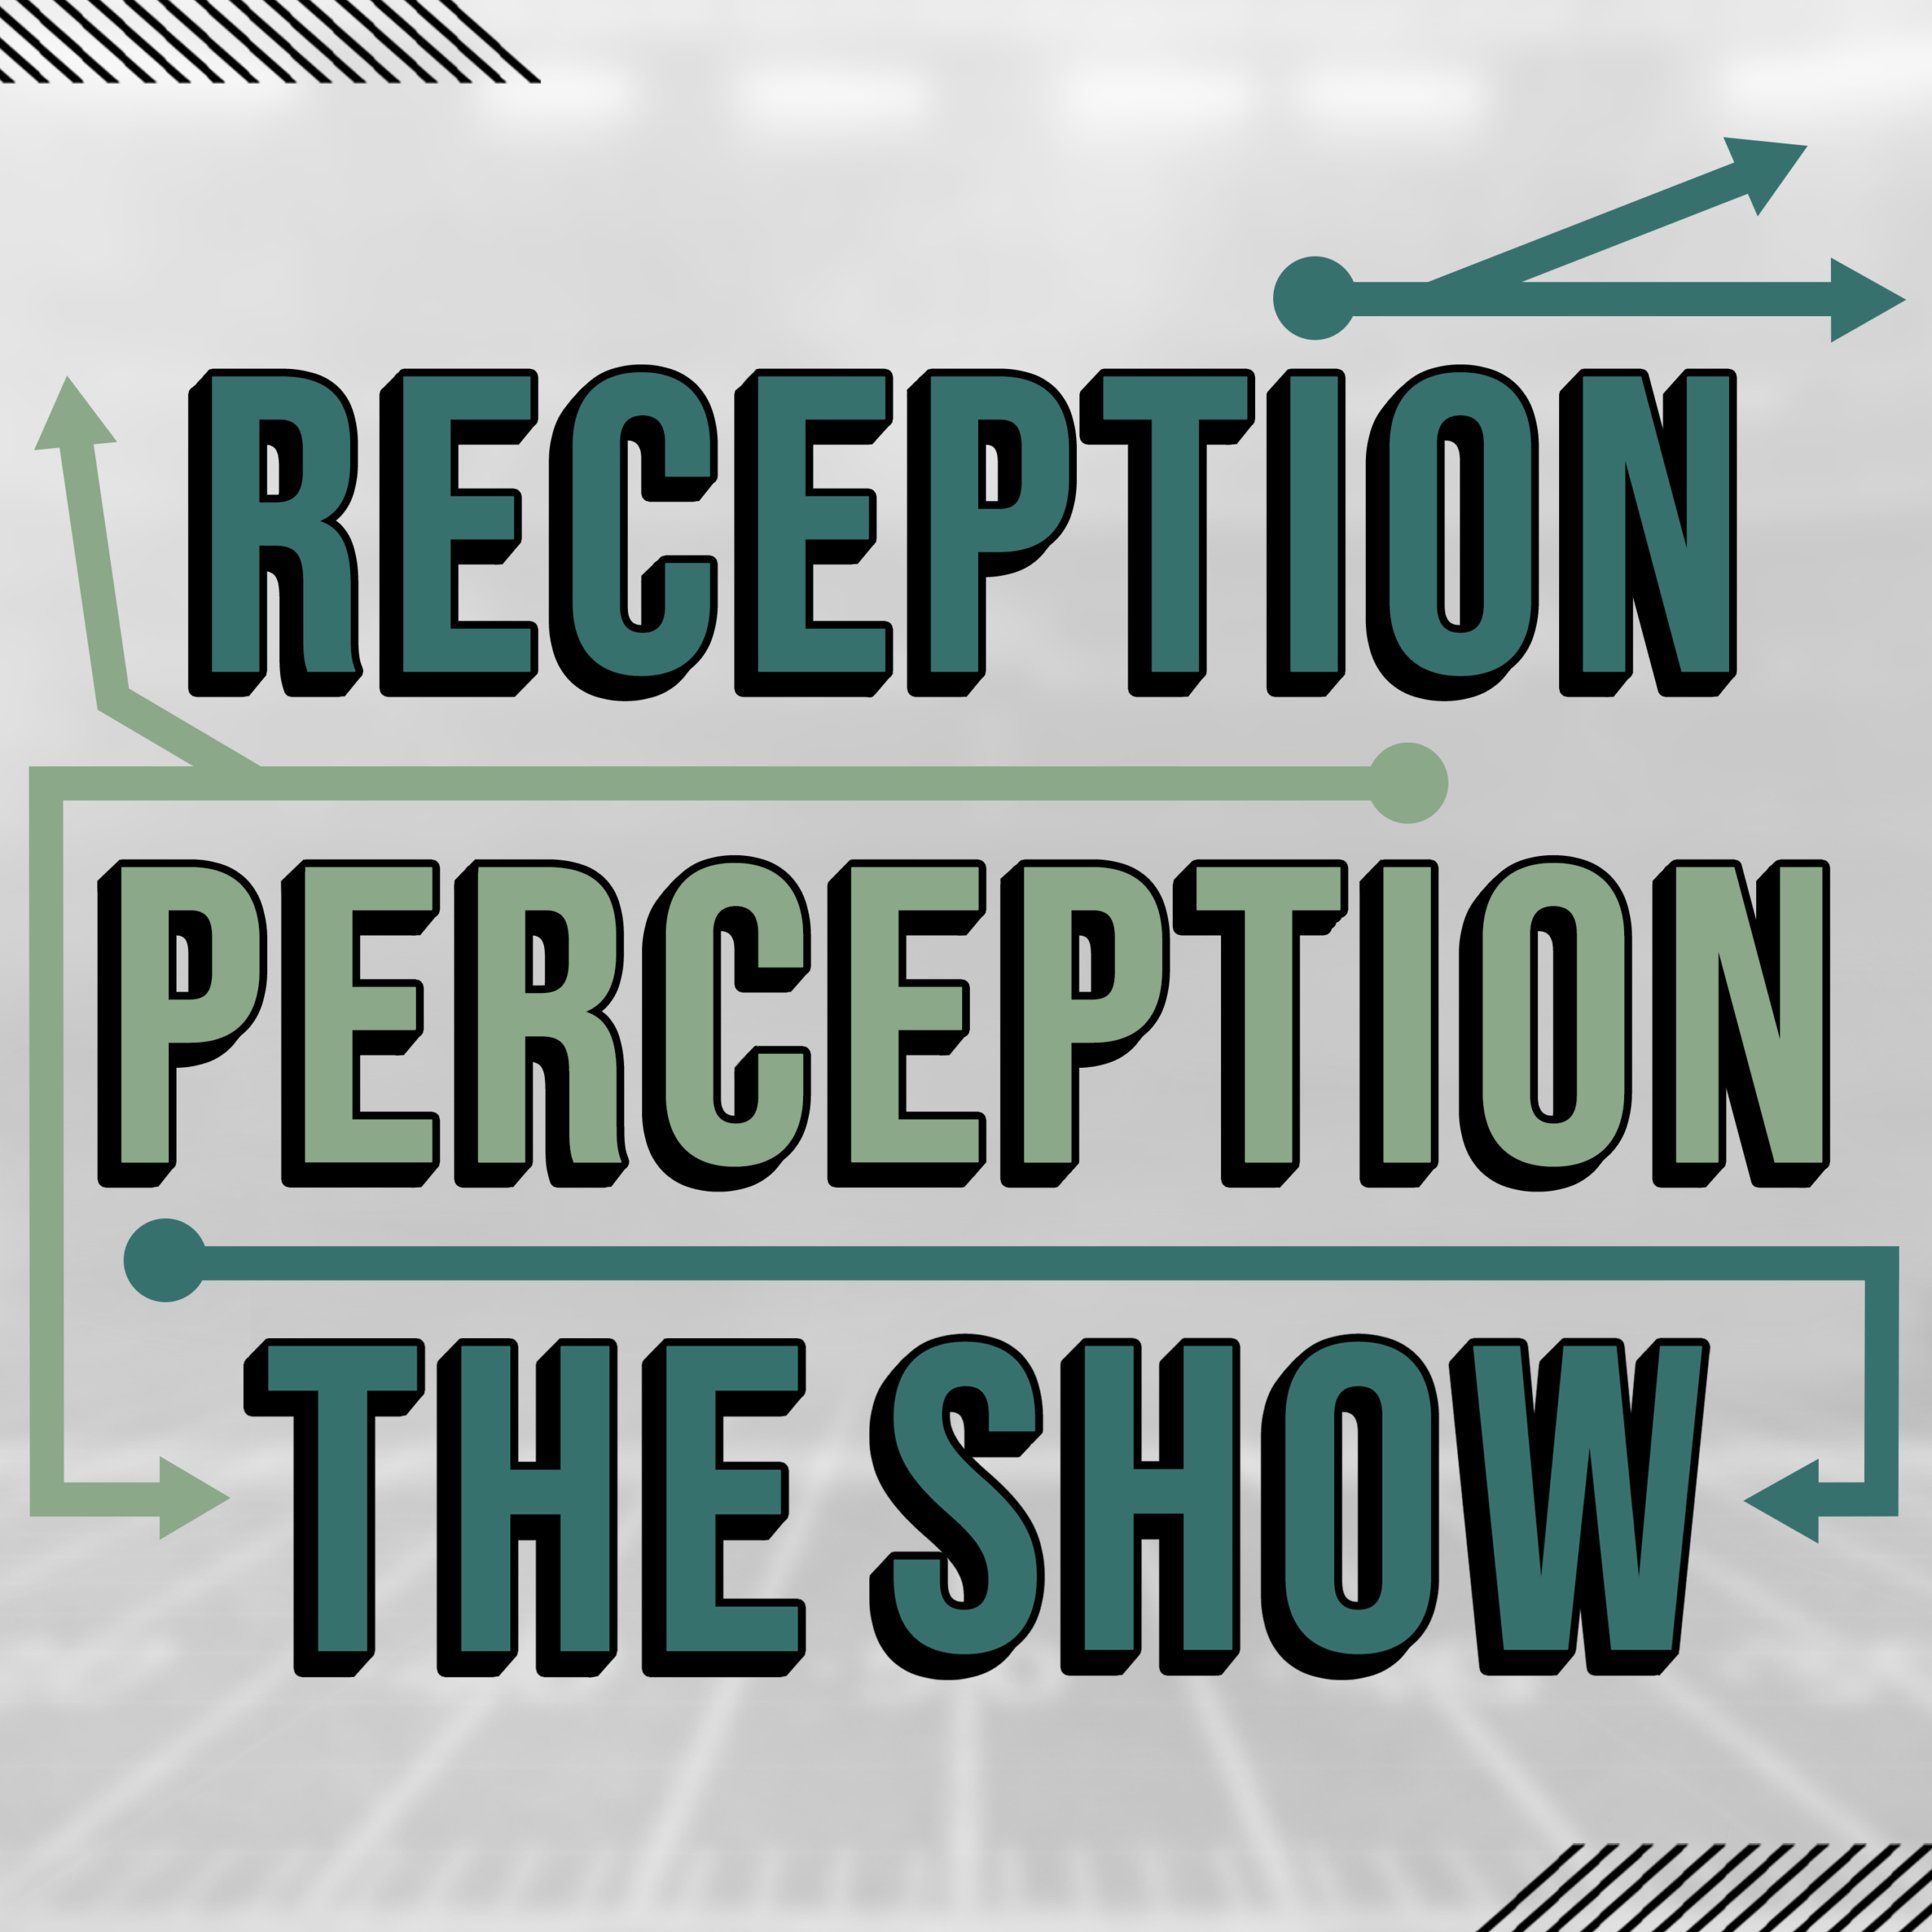 Reception Perception The Show – Receiver Groups Take Center Stage in Week Two